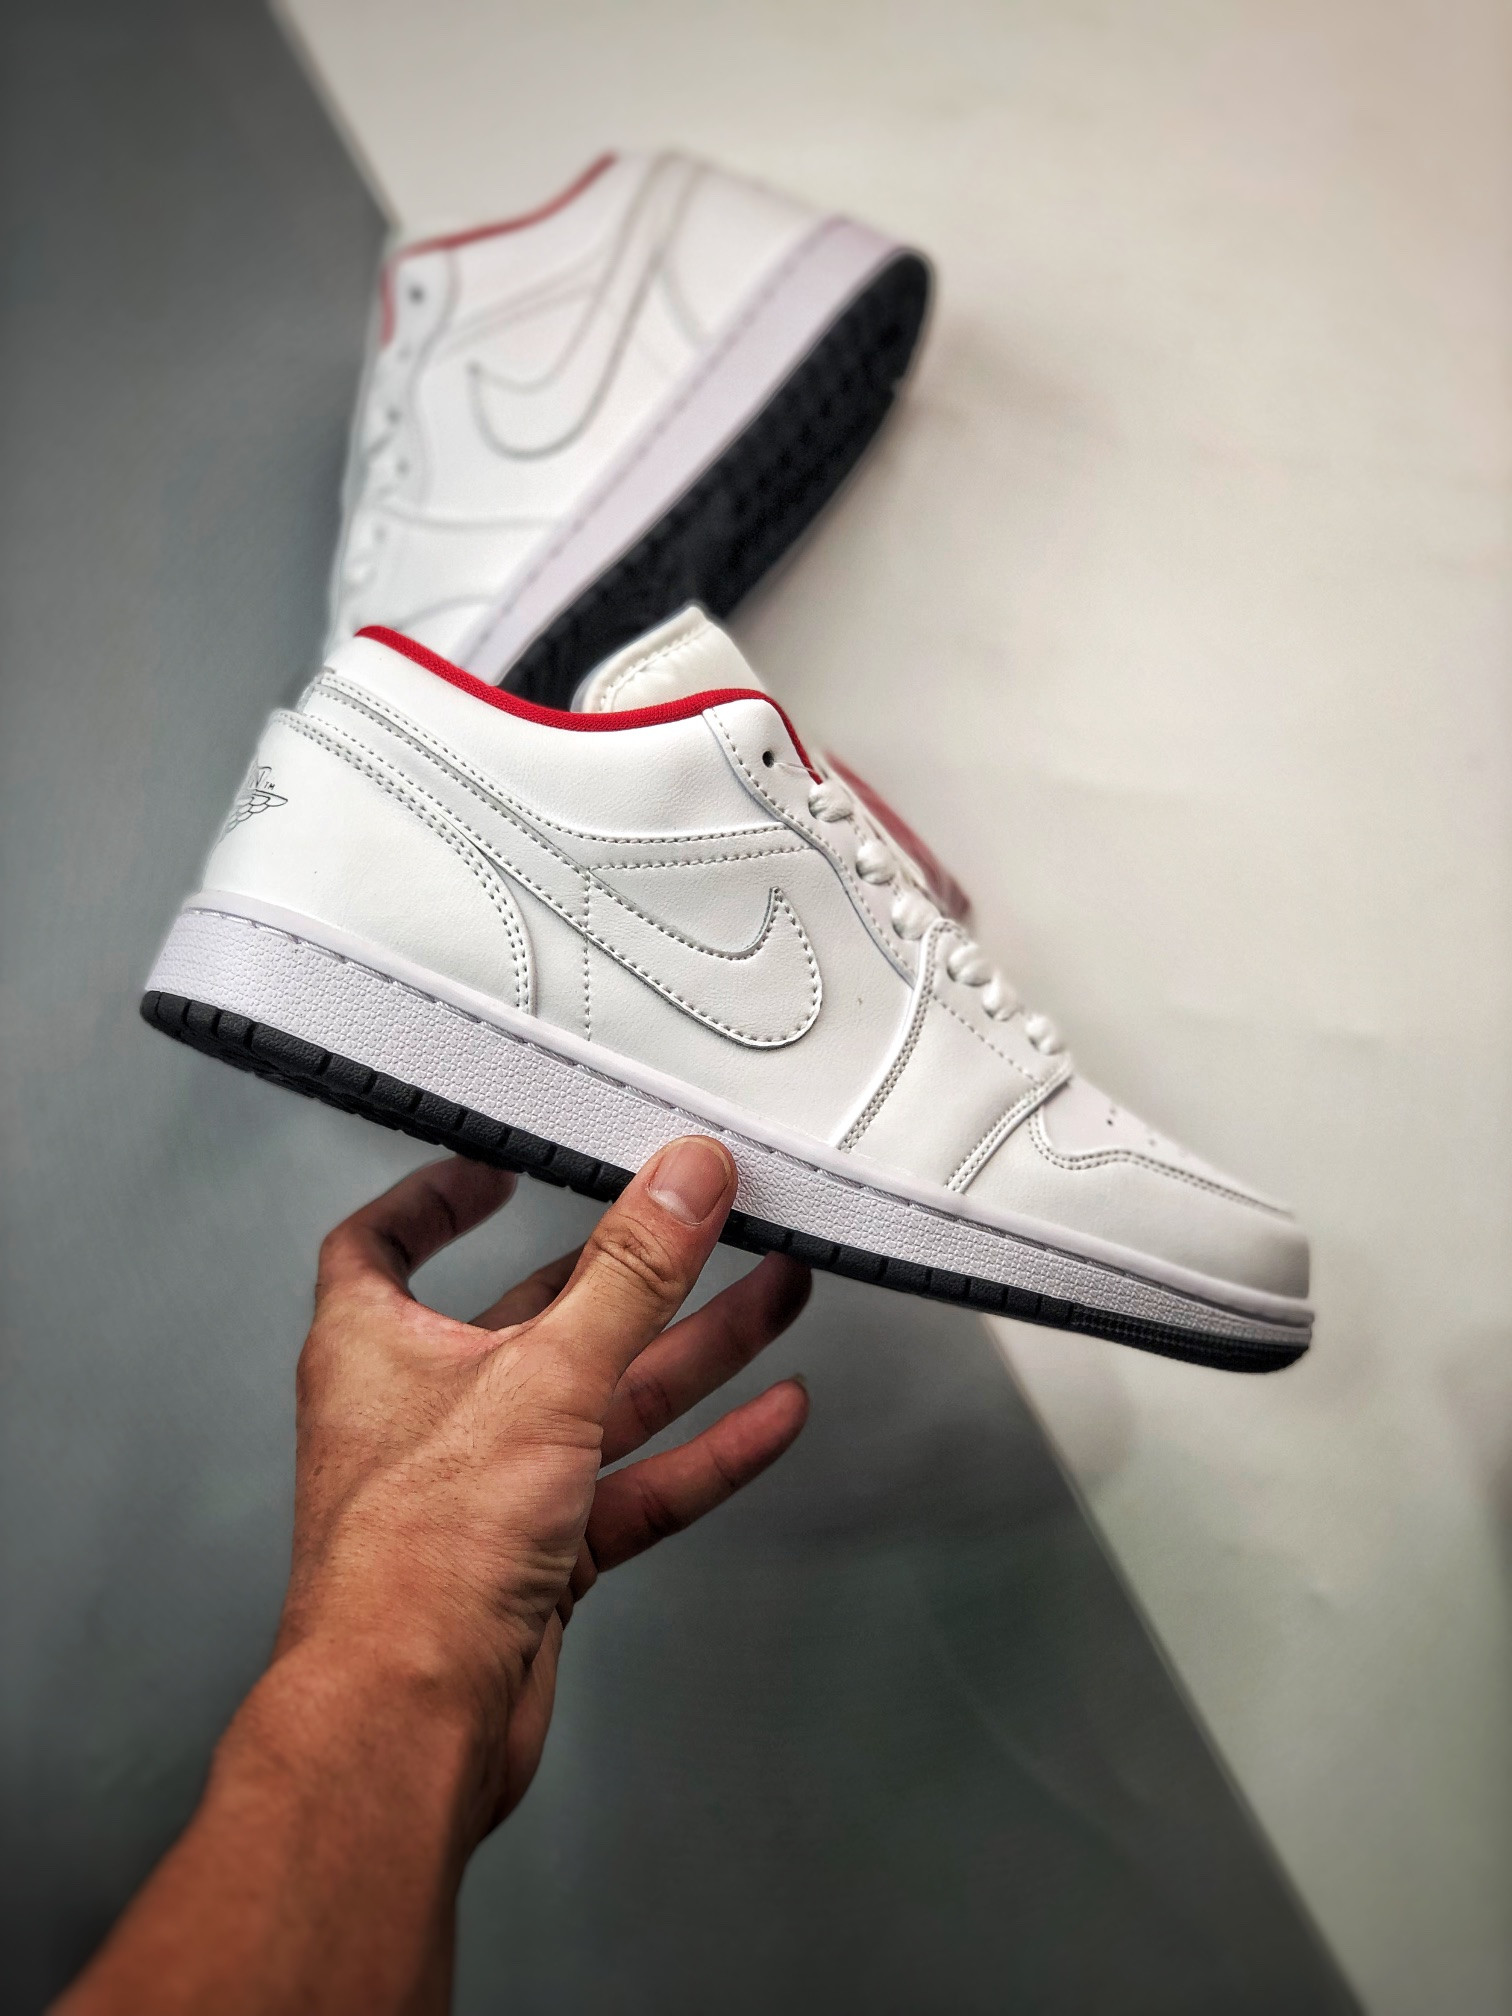 Air Jordan 1 Low White Red with Mismatched Insoles